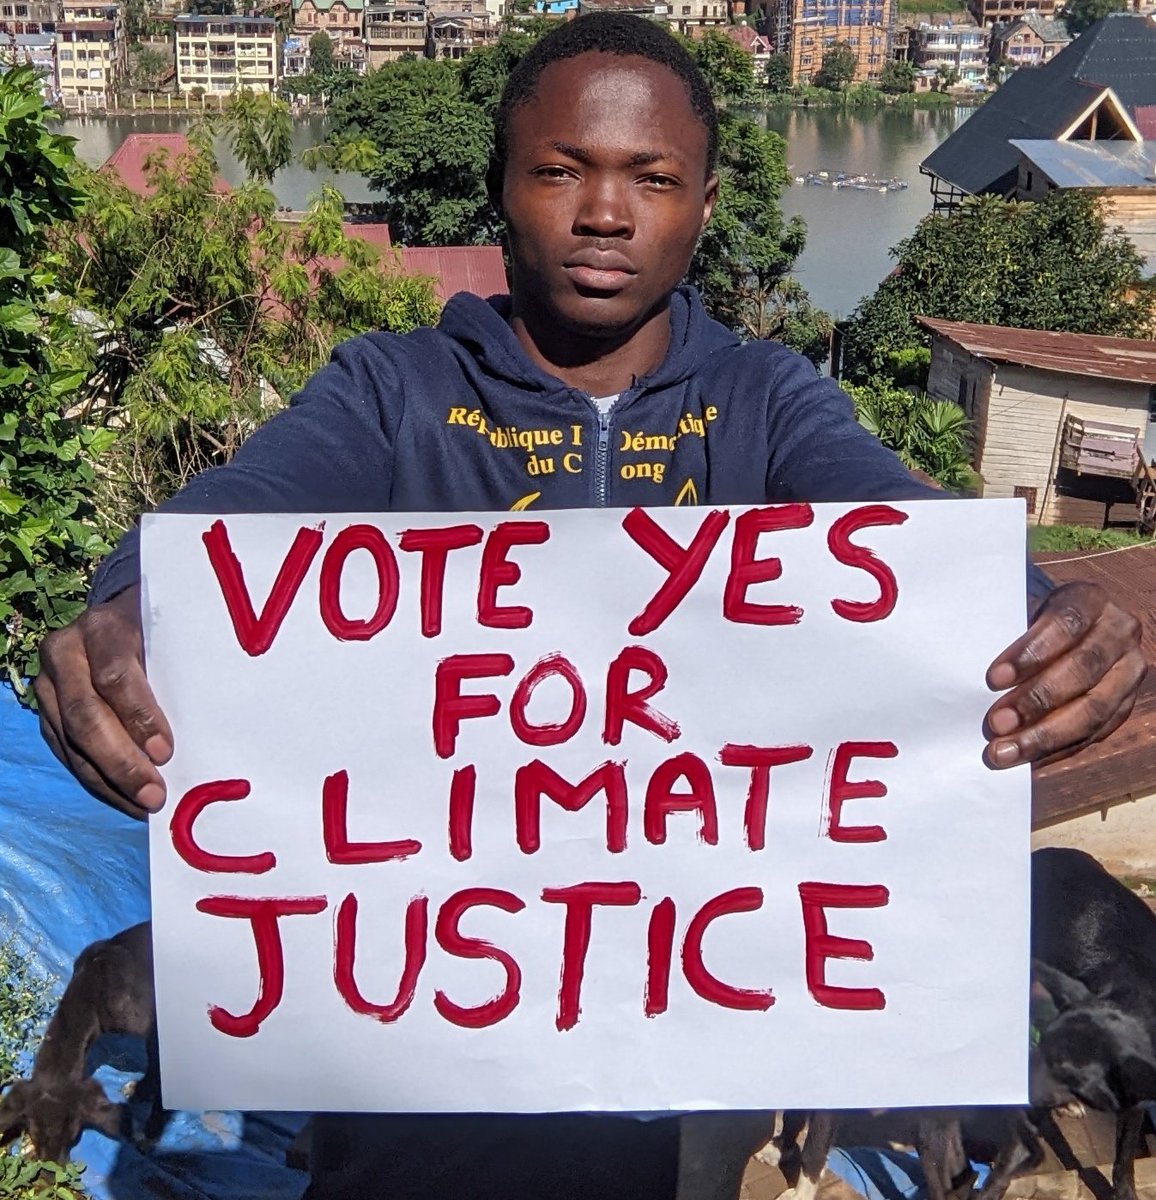 World leaders, give humanity a second chance at survival by voting Yes for climate justice at UNGA #ICJAO4Climate today.

#VoteYesForClimateJustice, #UNGA, #ClimateJustice